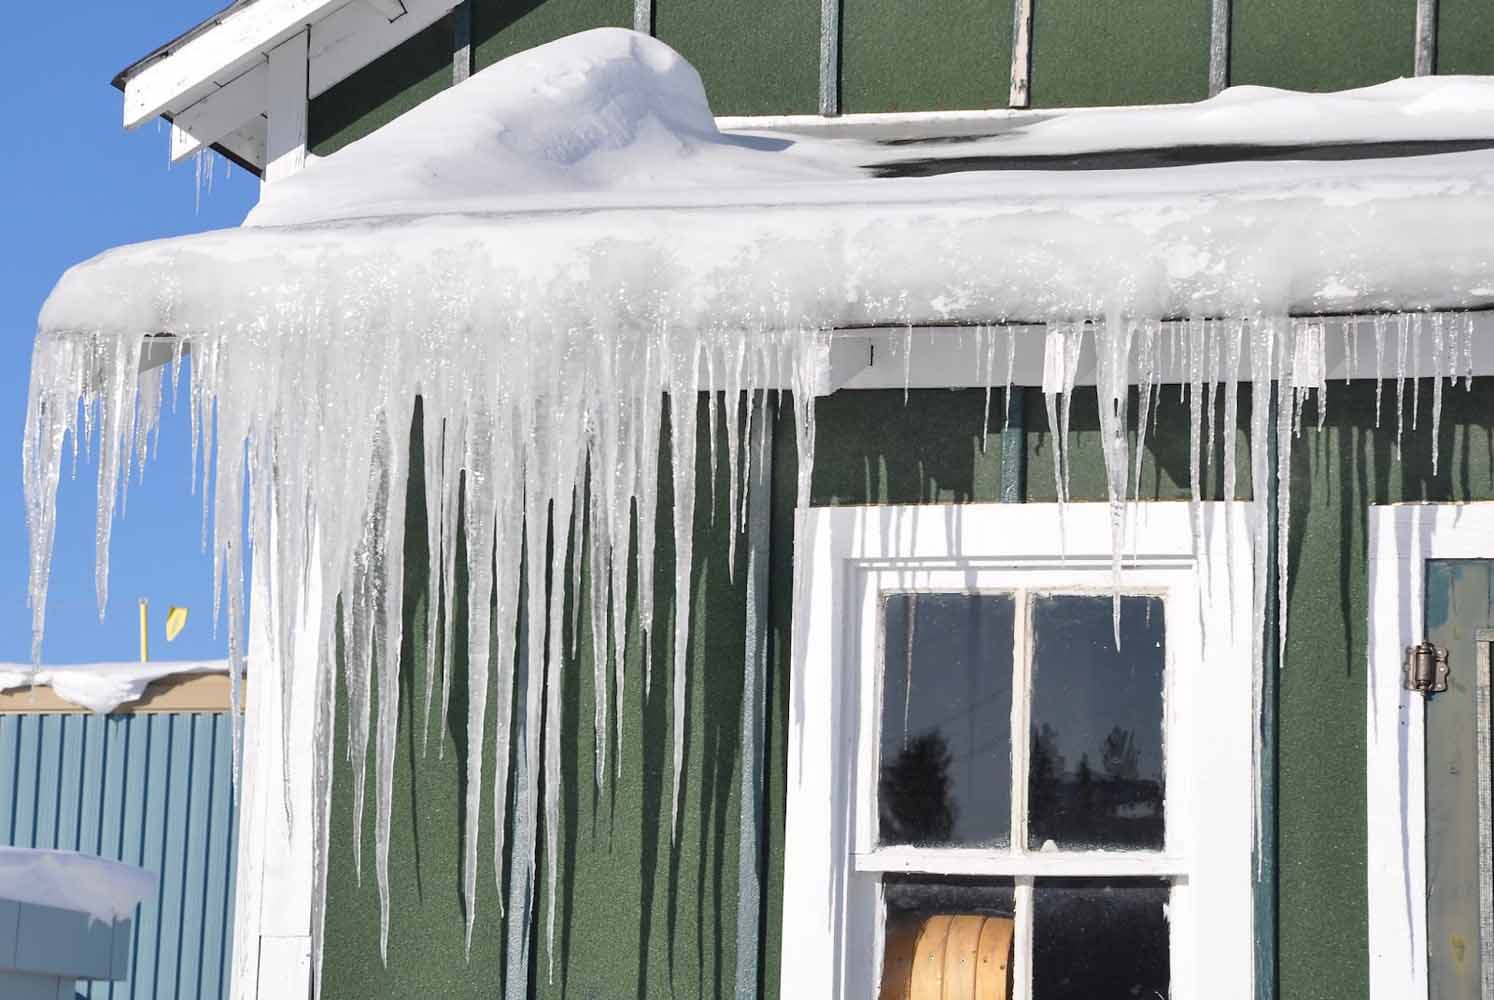 Ice dam, icicles, and snow on the roof of a green house